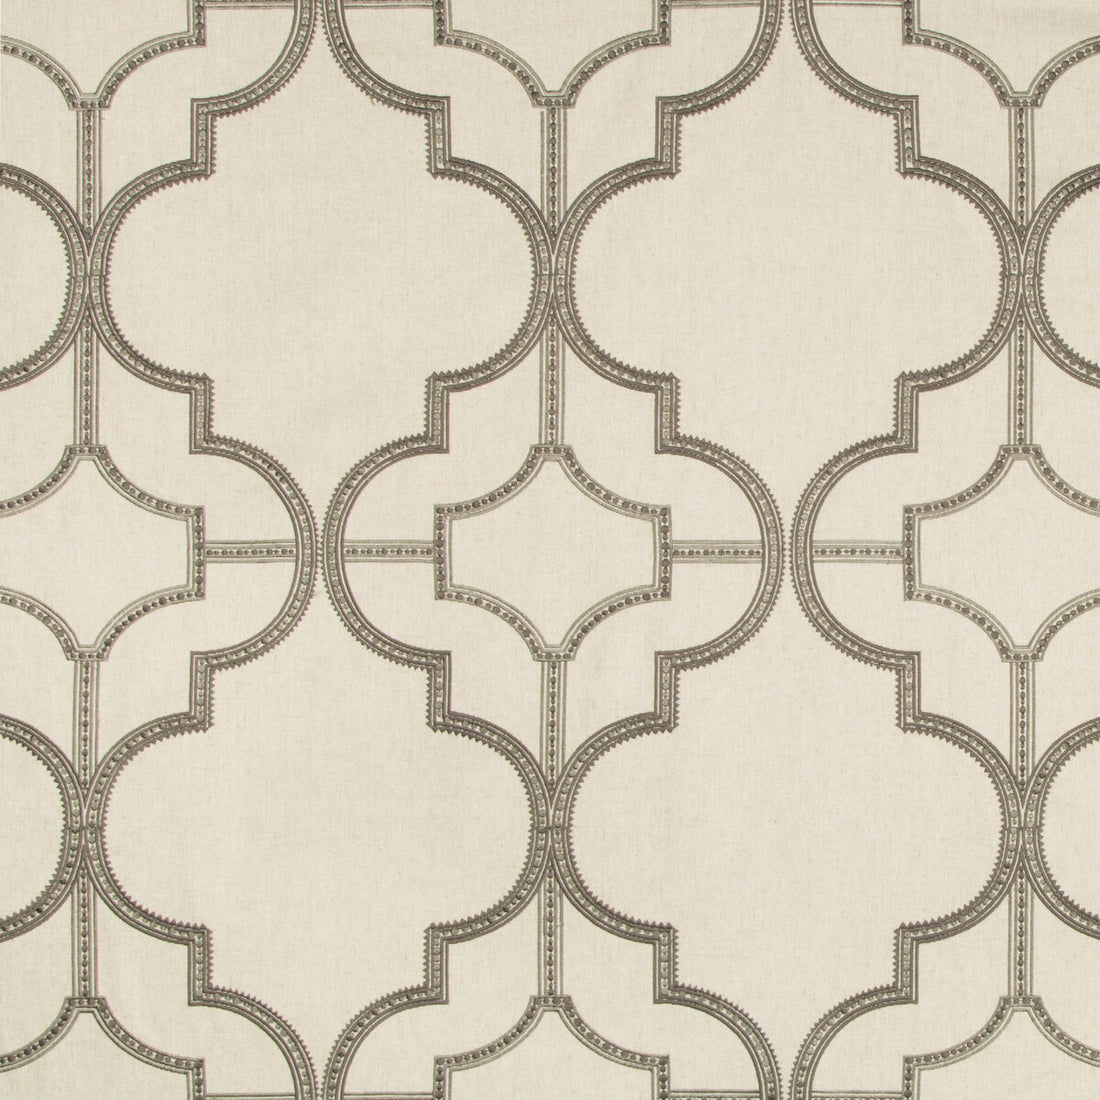 Wing Tip fabric in peat color - pattern 4364.106.0 - by Kravet Couture in the David Phoenix Well-Suited collection